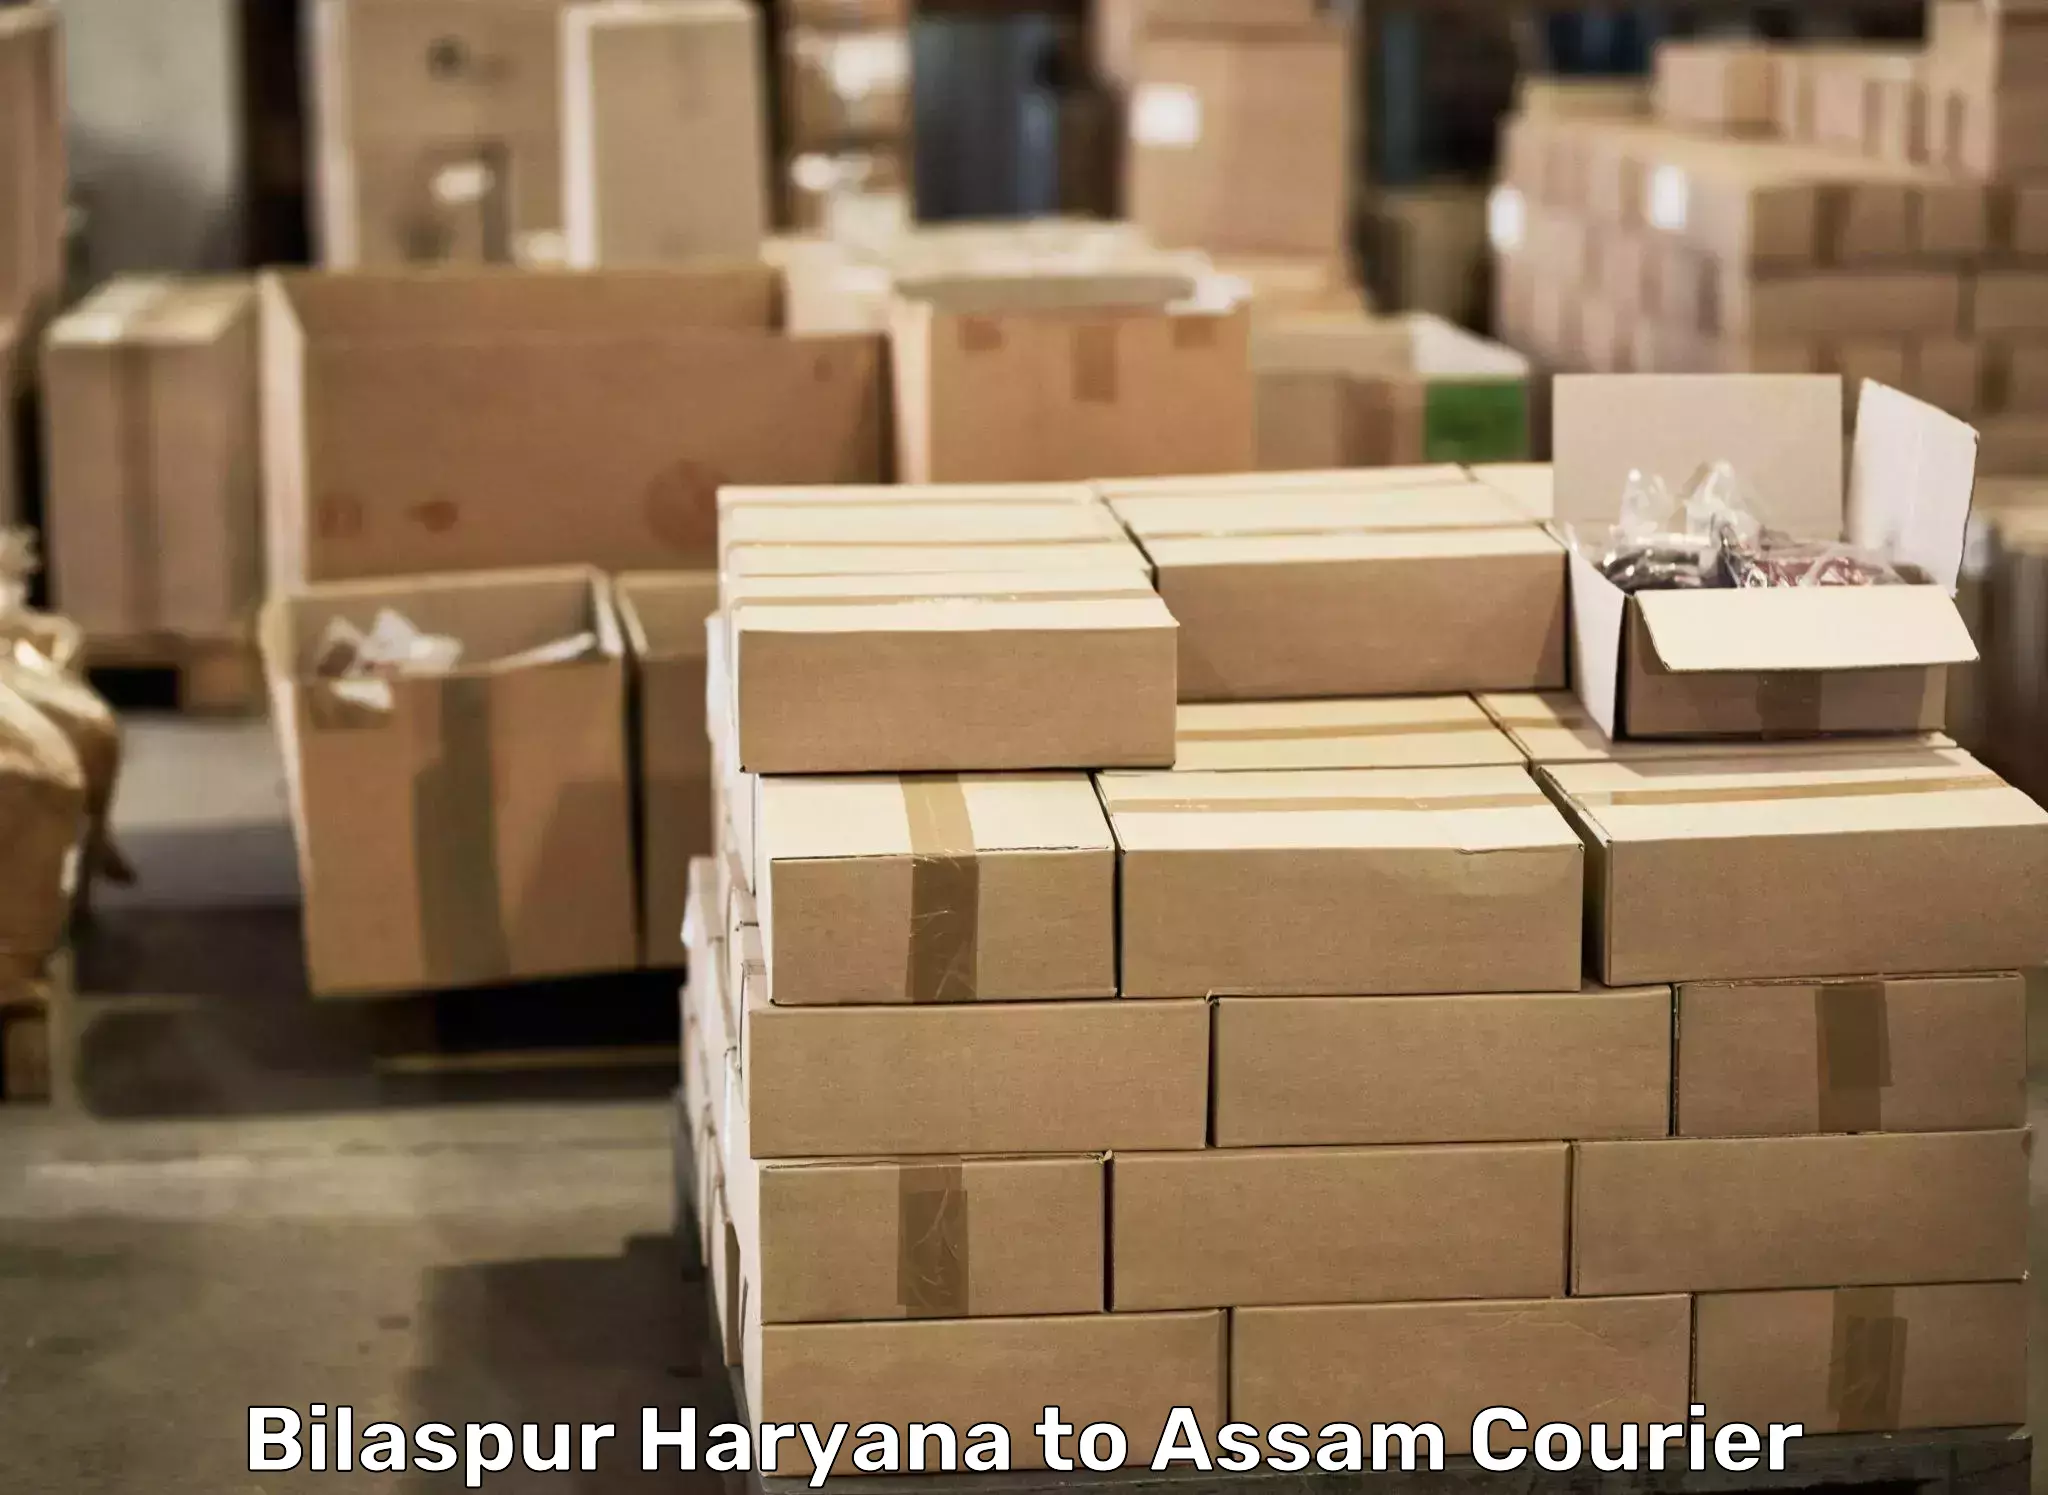 Dependable moving services Bilaspur Haryana to Guwahati